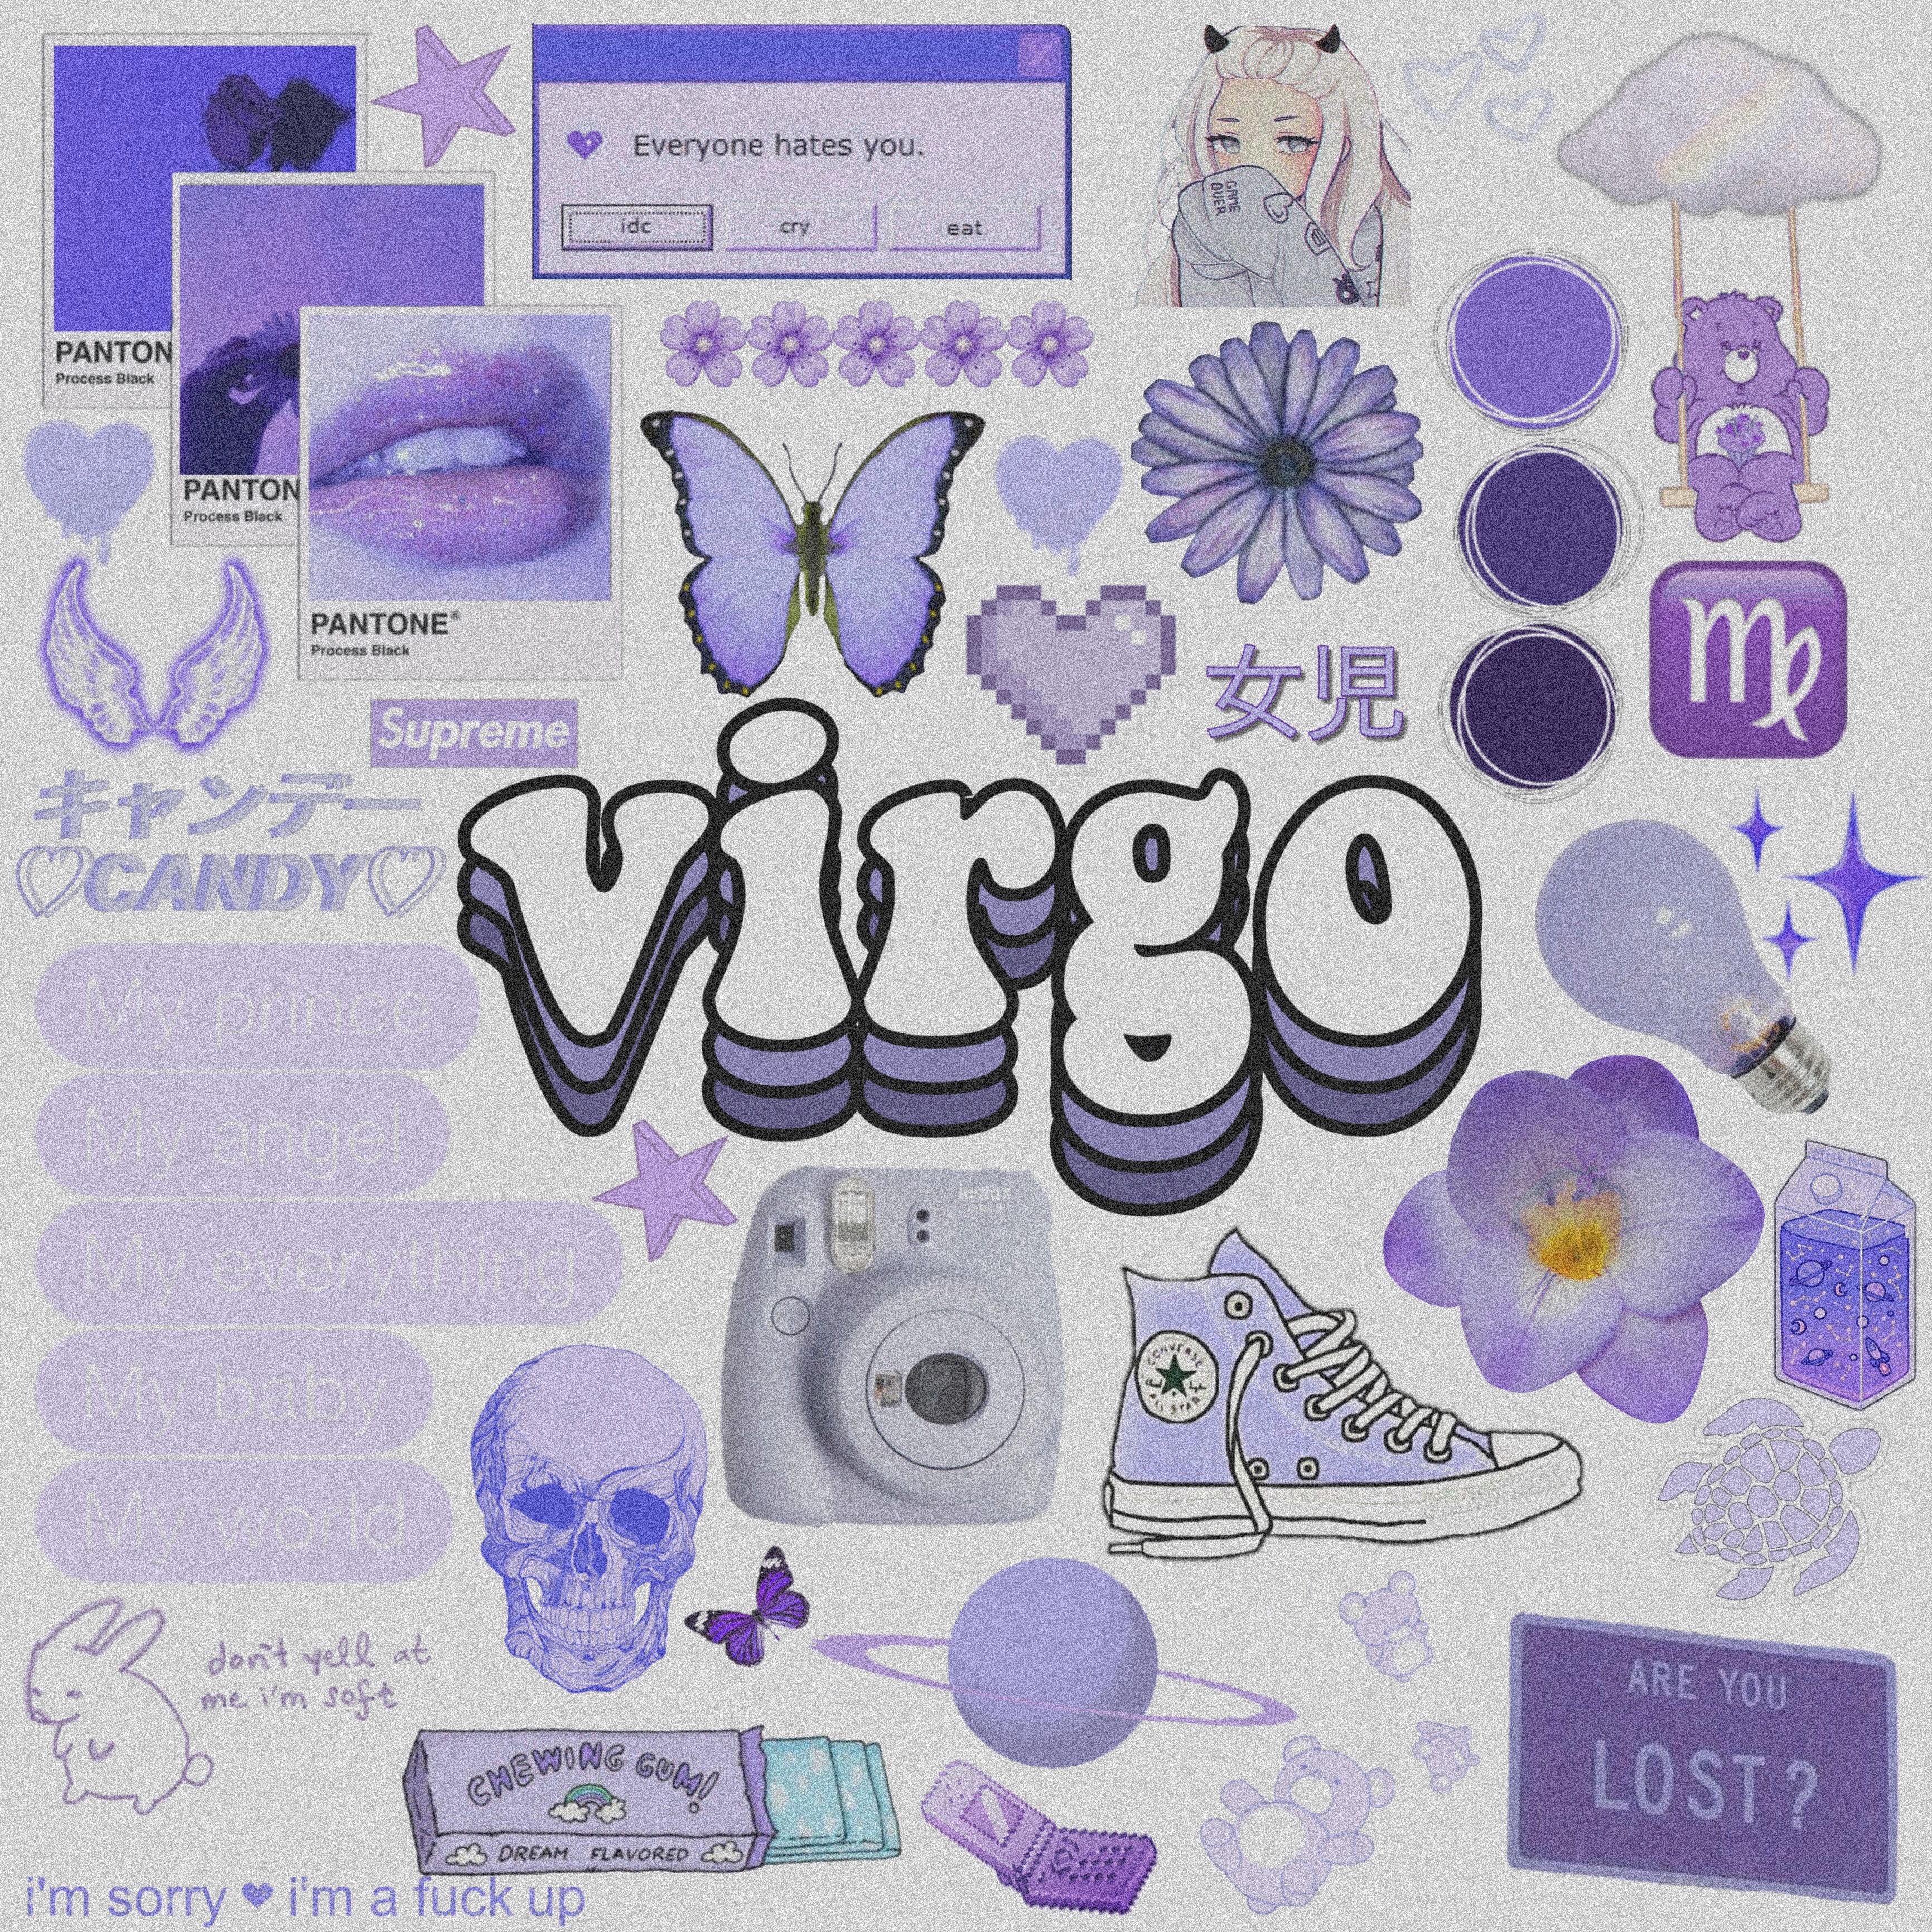 Aesthetic background image with the word Virgo in the center surrounded by purple and white images. - Virgo